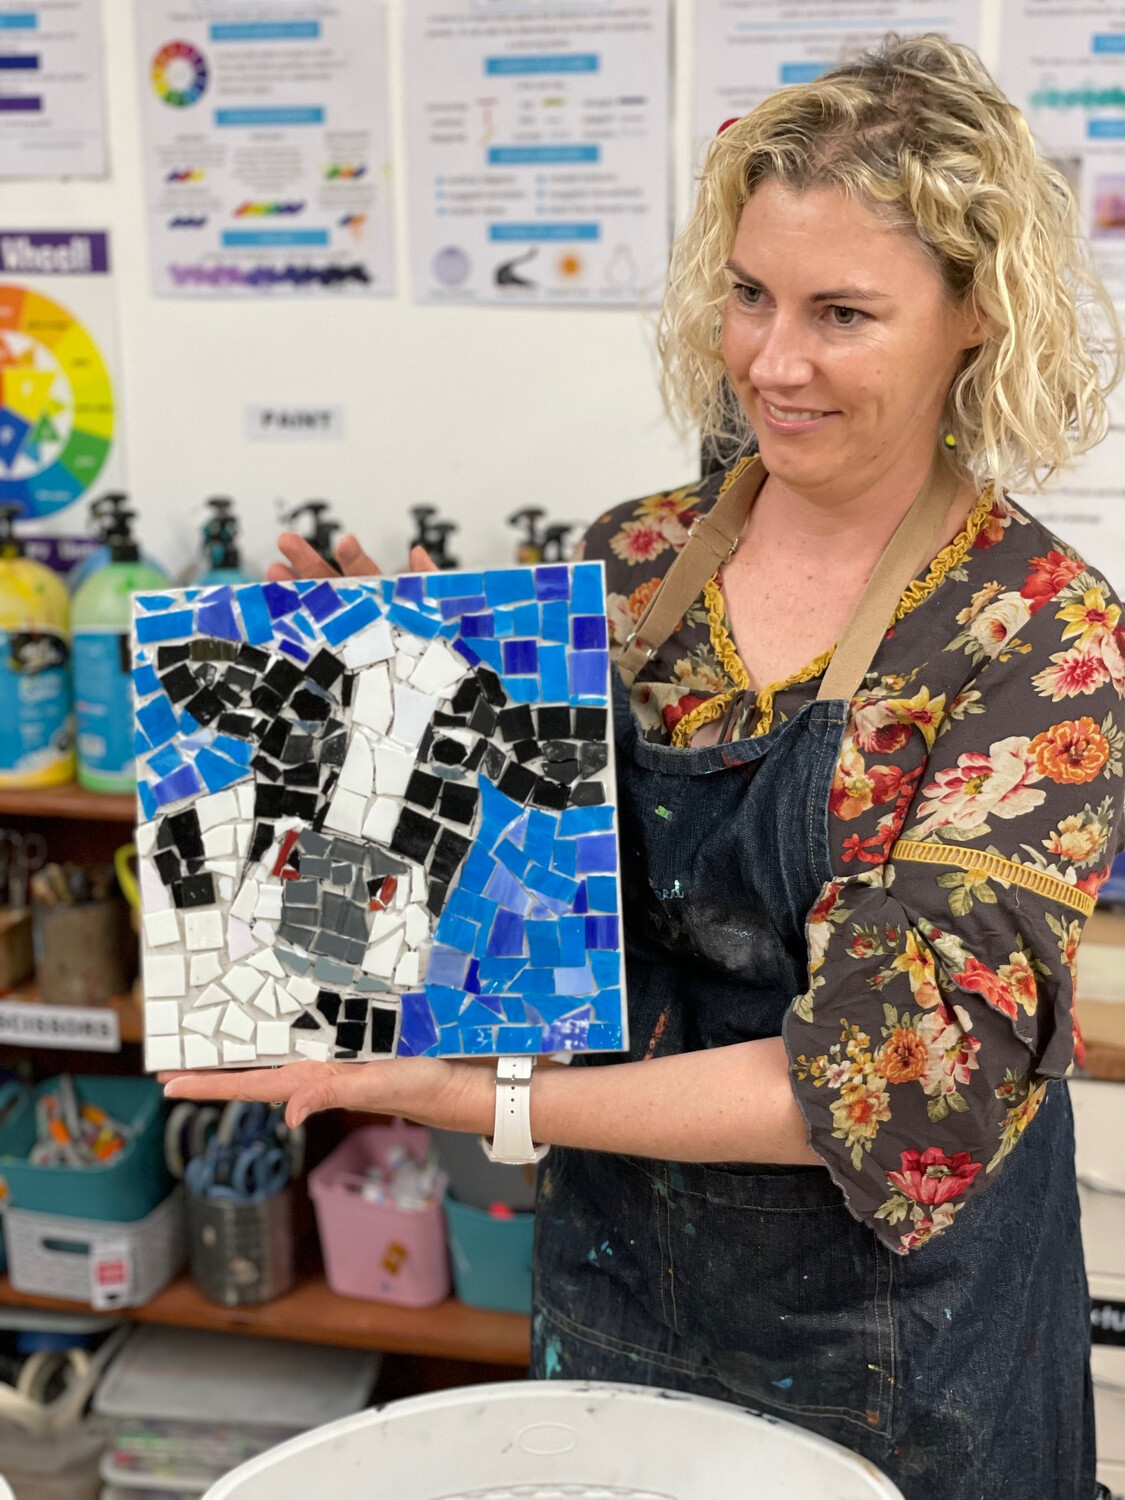 Mosaic Workshop - Wednesday 25th January, 2pm-4:30pm